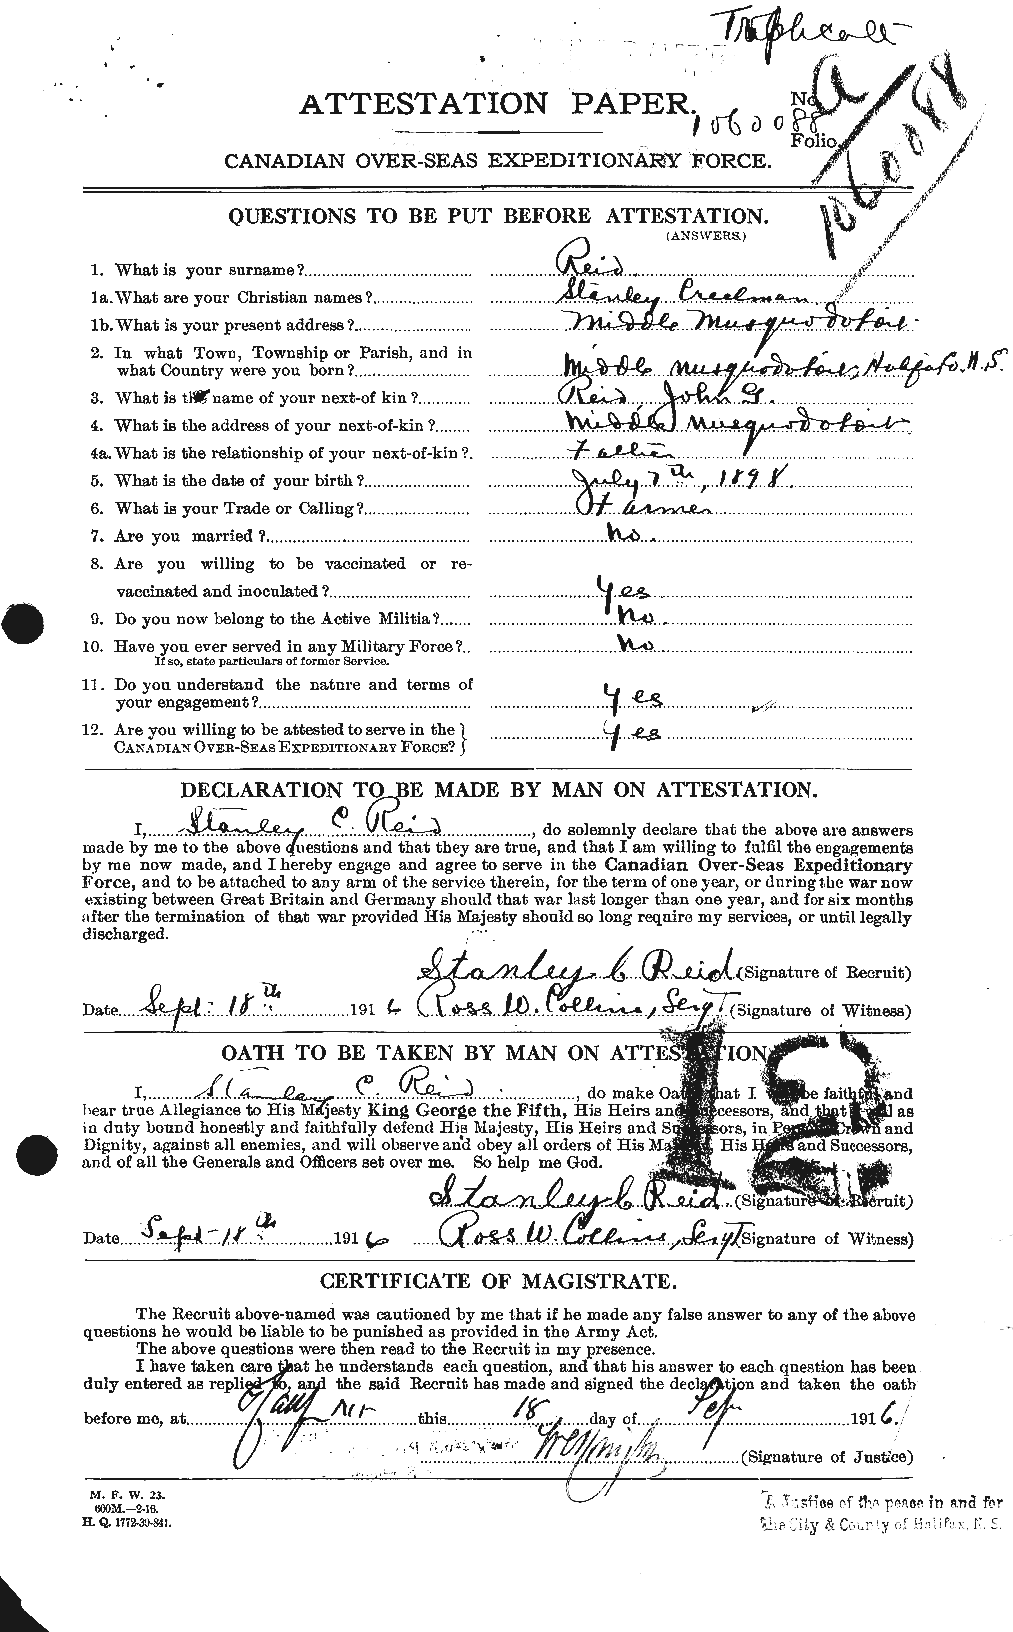 Personnel Records of the First World War - CEF 601966a